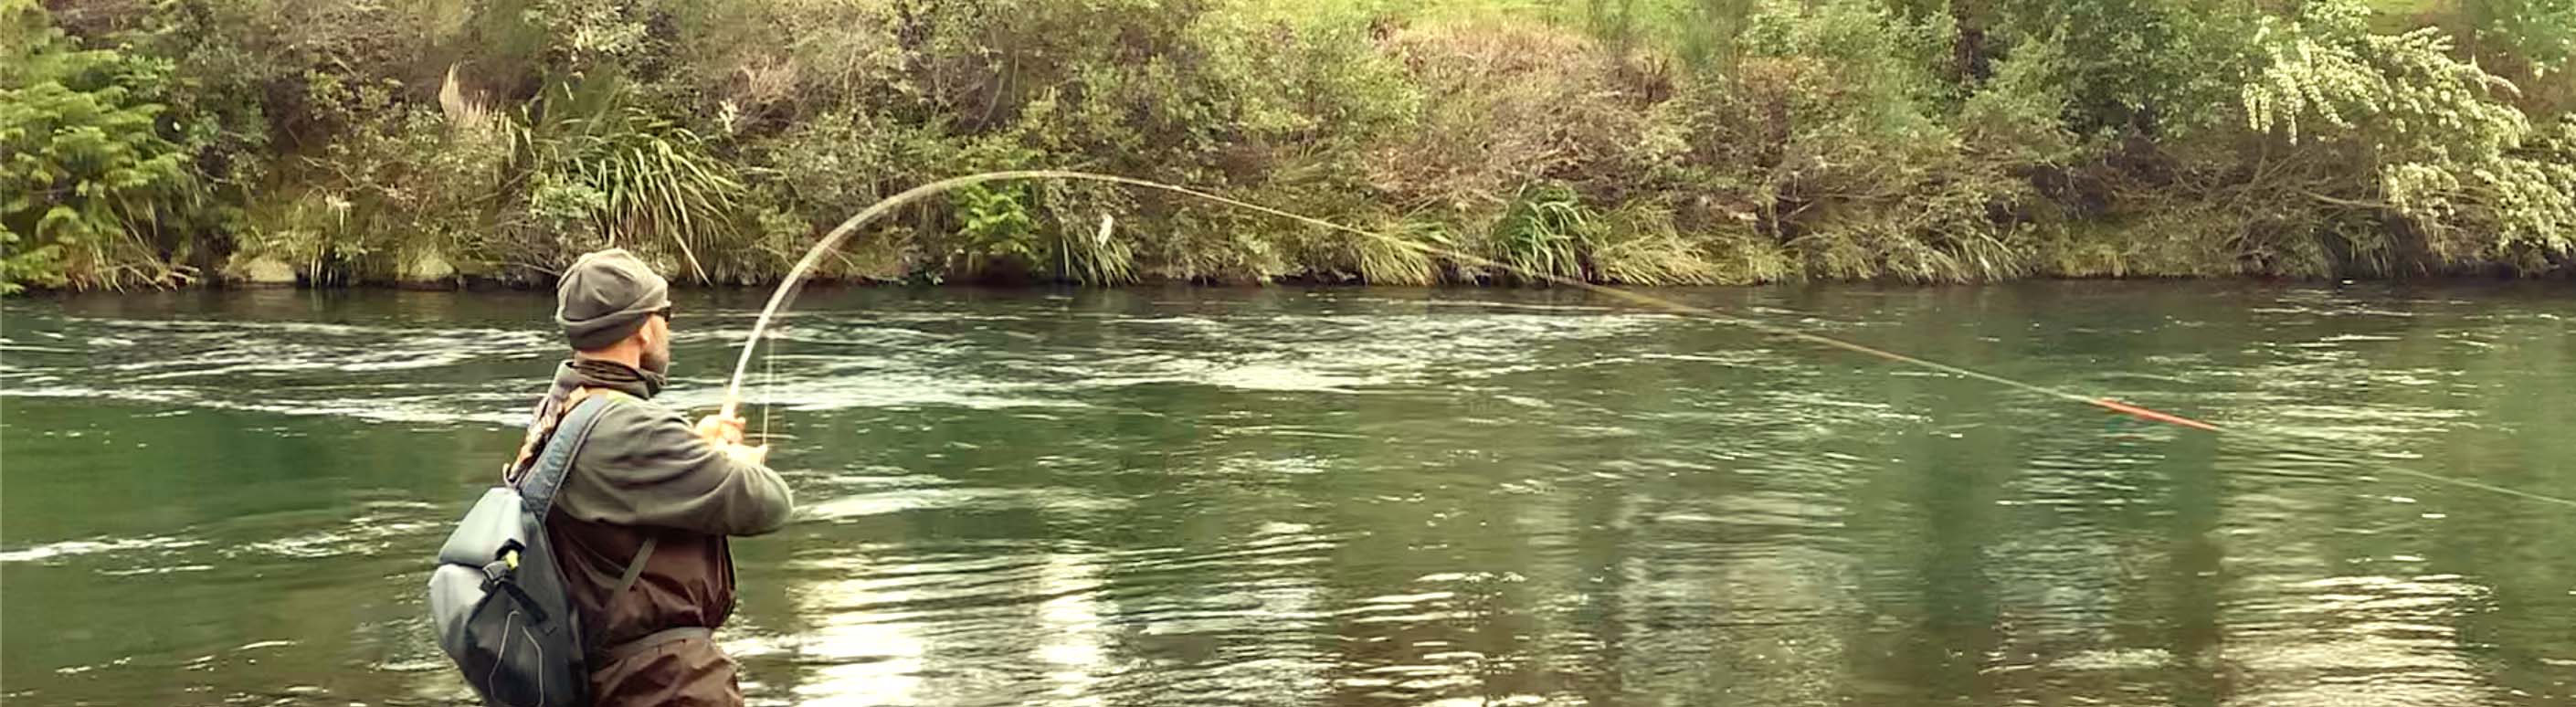 Man-fishing-hooking-a-trout-with-orvis-mission-12-foot-5wt-rod-on-Tongariro-River-New-Zealand